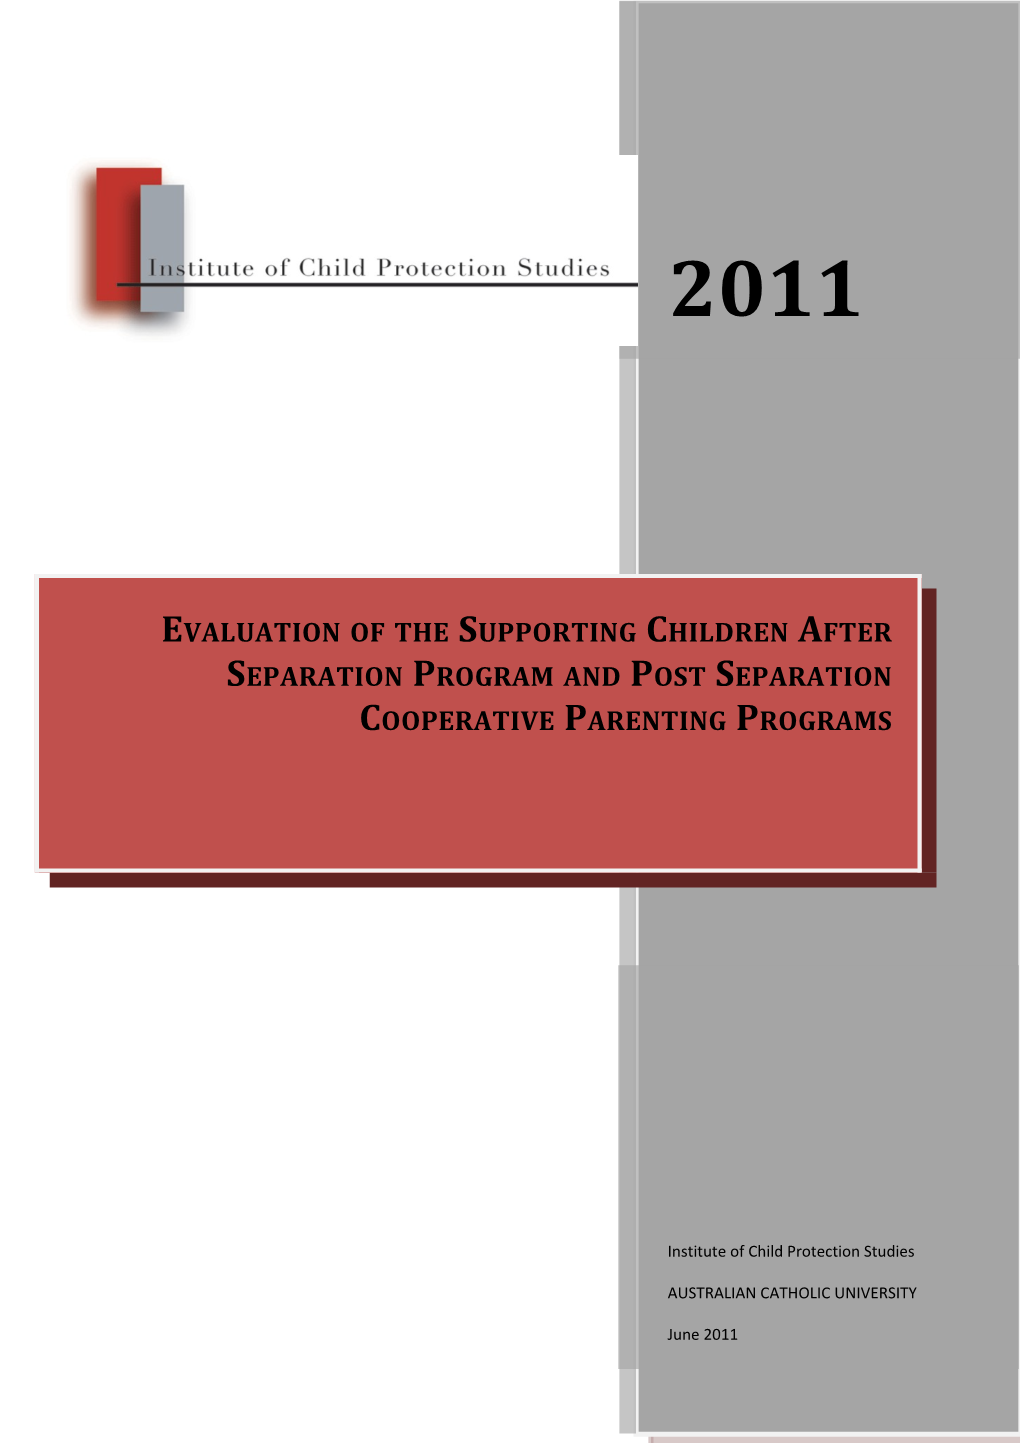 Evaluation of the Supporting Children After Separation Program and Post Separation Cooperative